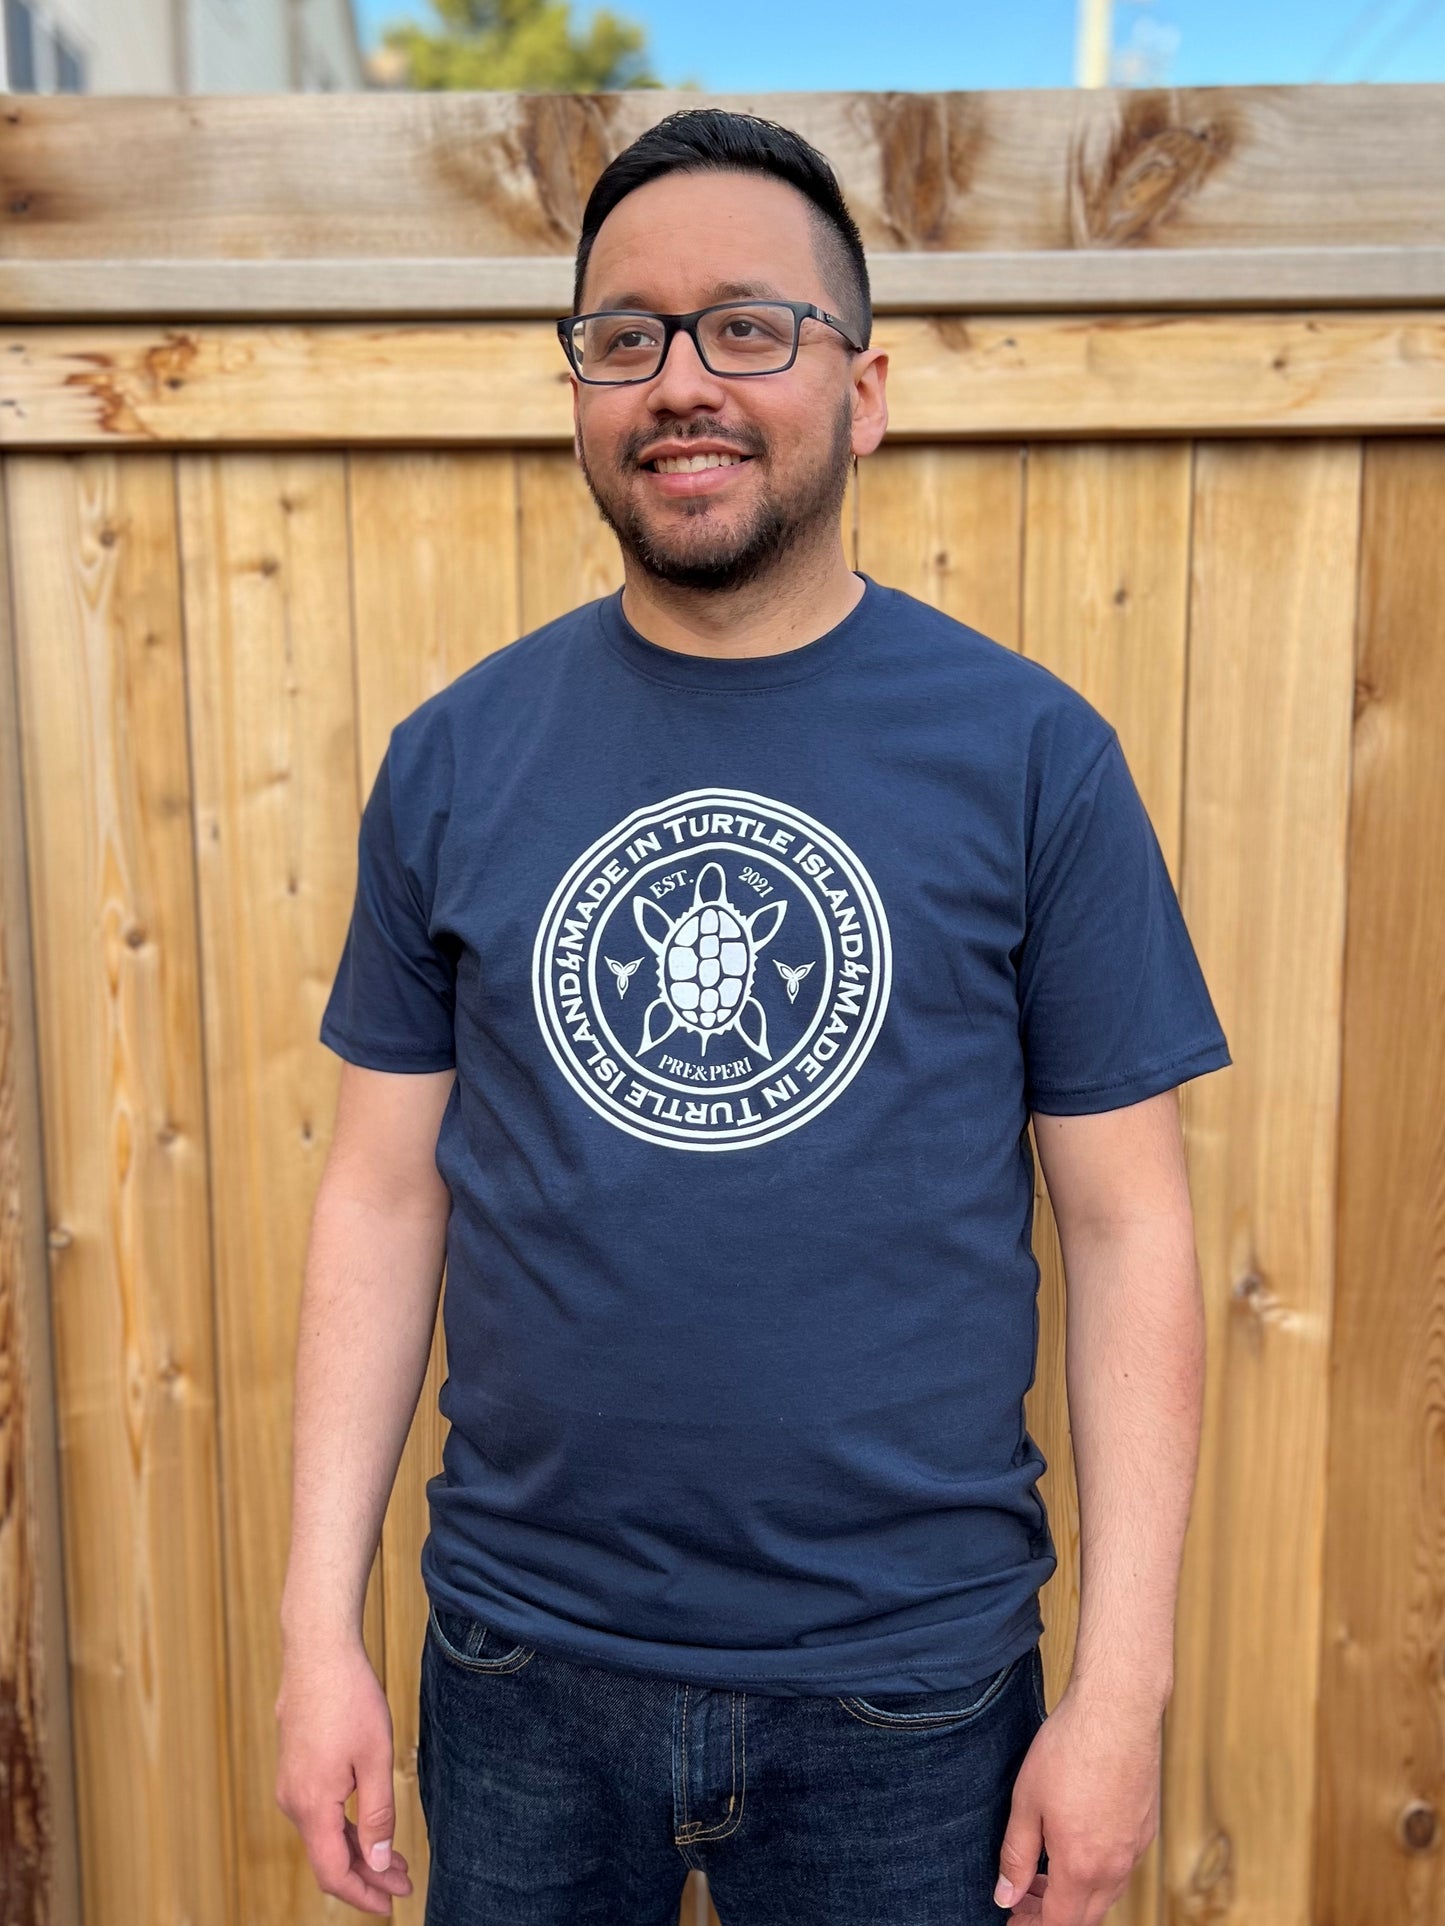 A man wearing a navy unisex t-shirt with a white print of a Turtle flanked by trilliums and with the words "Made in Turtle Island" around it in a circle. 